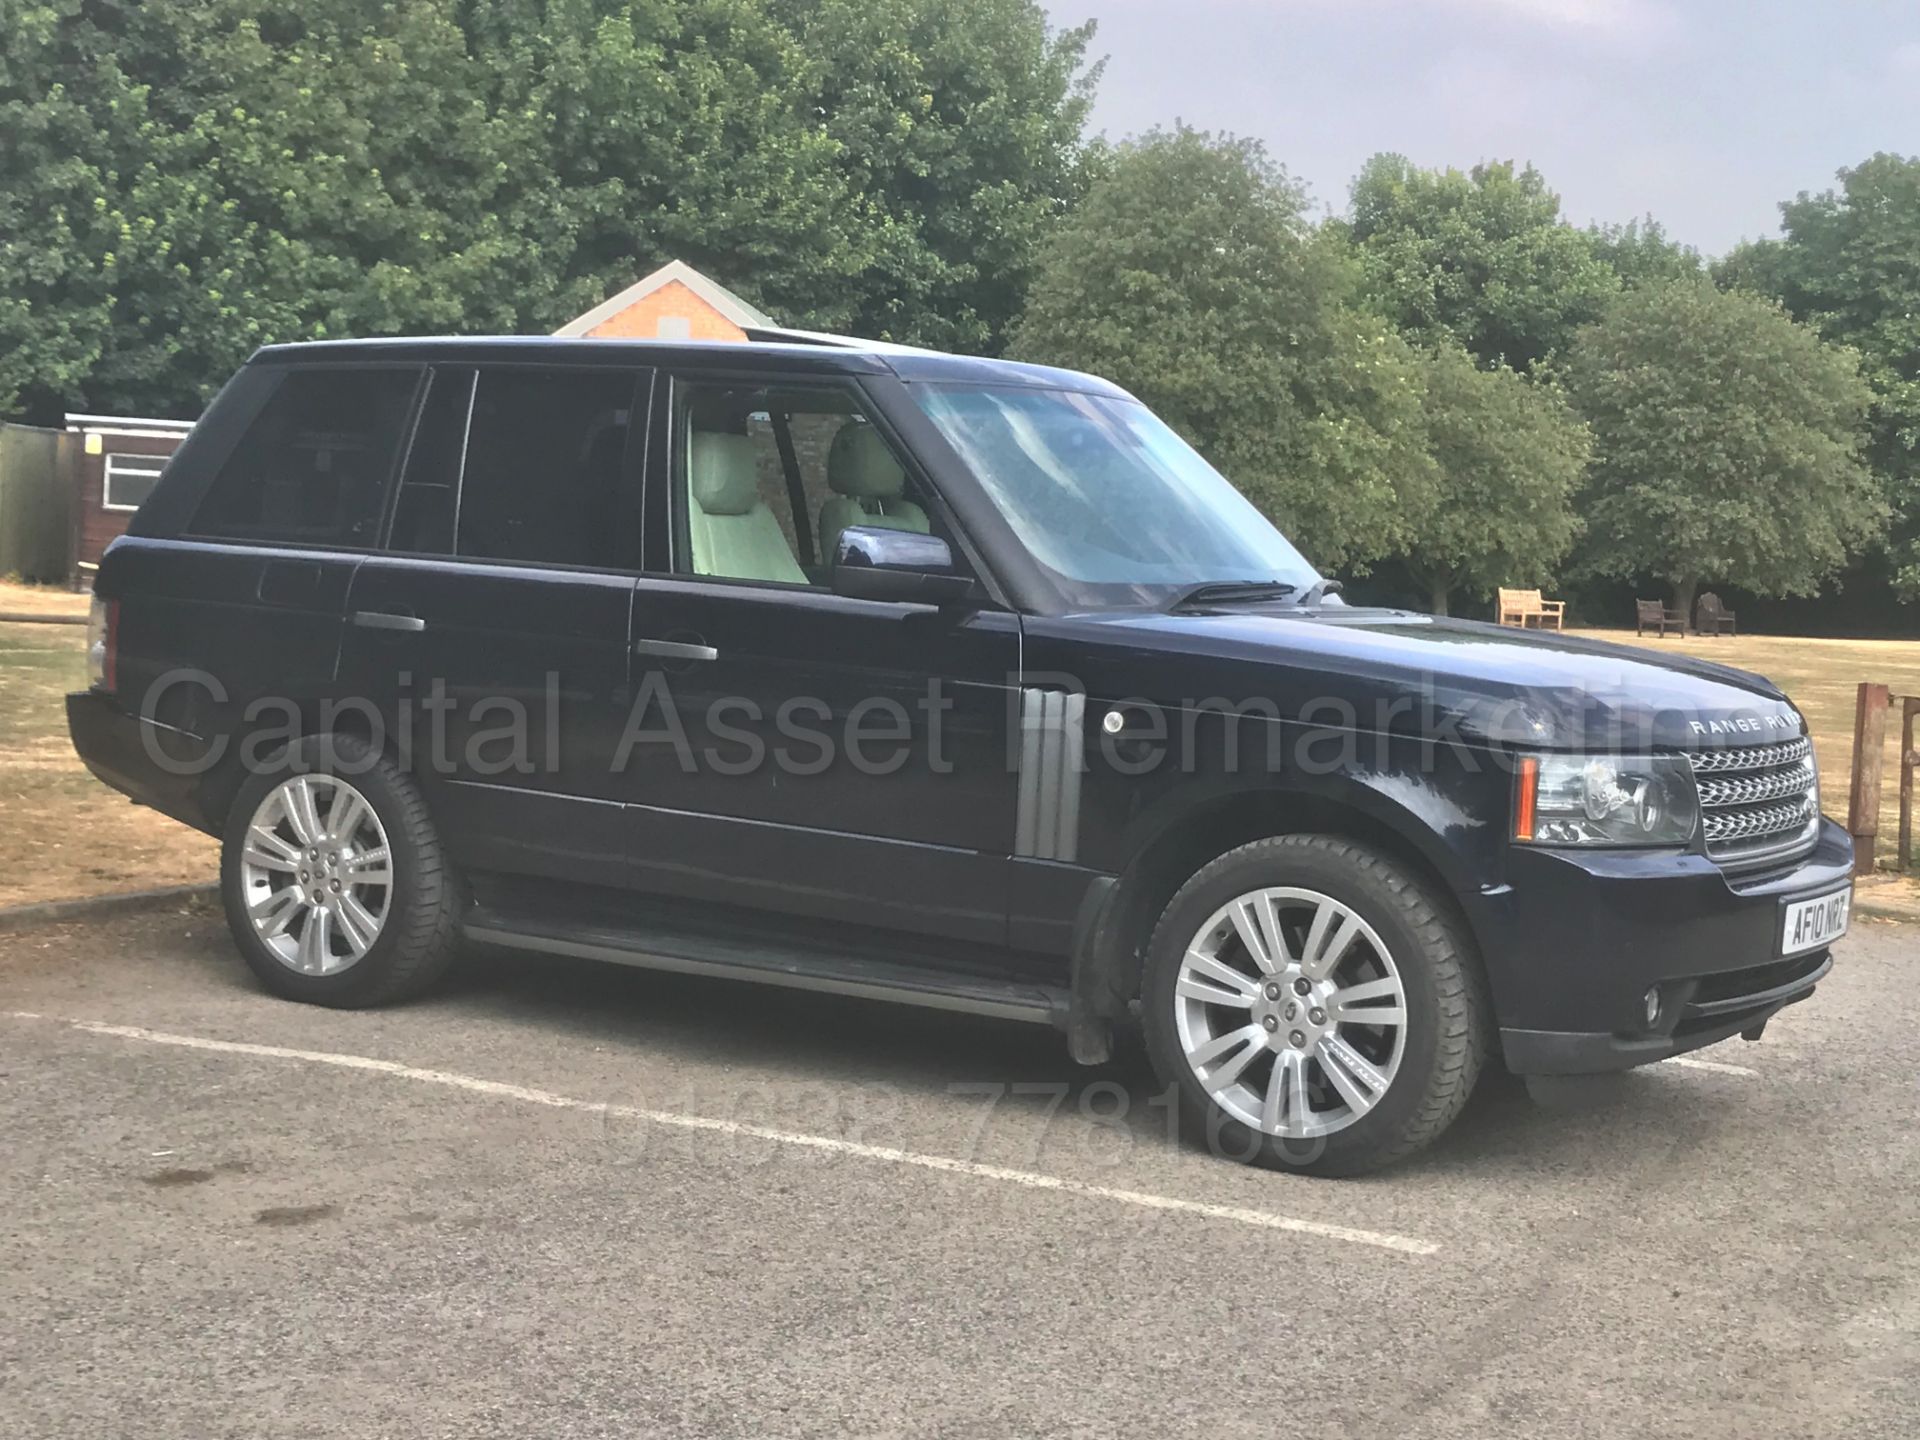 (On Sale) RANGE ROVER VOGUE **SE EDITION** (2010 - FACELIFT EDITION) 'TDV8 - 268 BHP - AUTO' **WOW** - Image 14 of 62